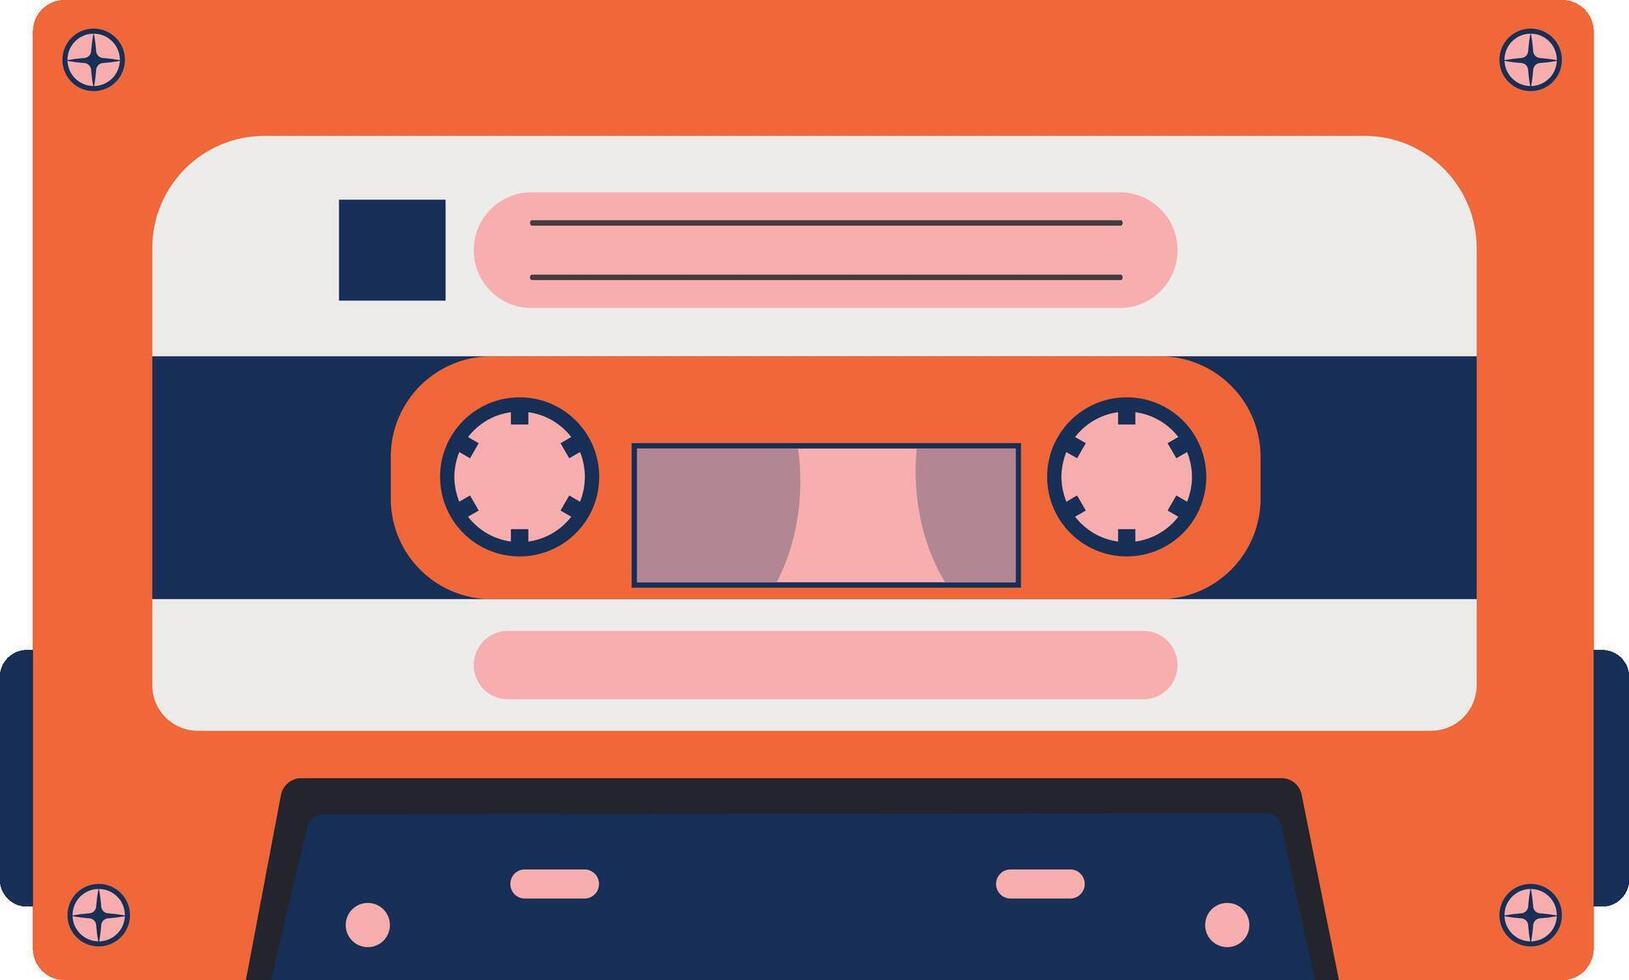 Retro Cassette with Classic Style. 80s Pop Songs and Stereo Music Cassettes. Isolated Icon vector